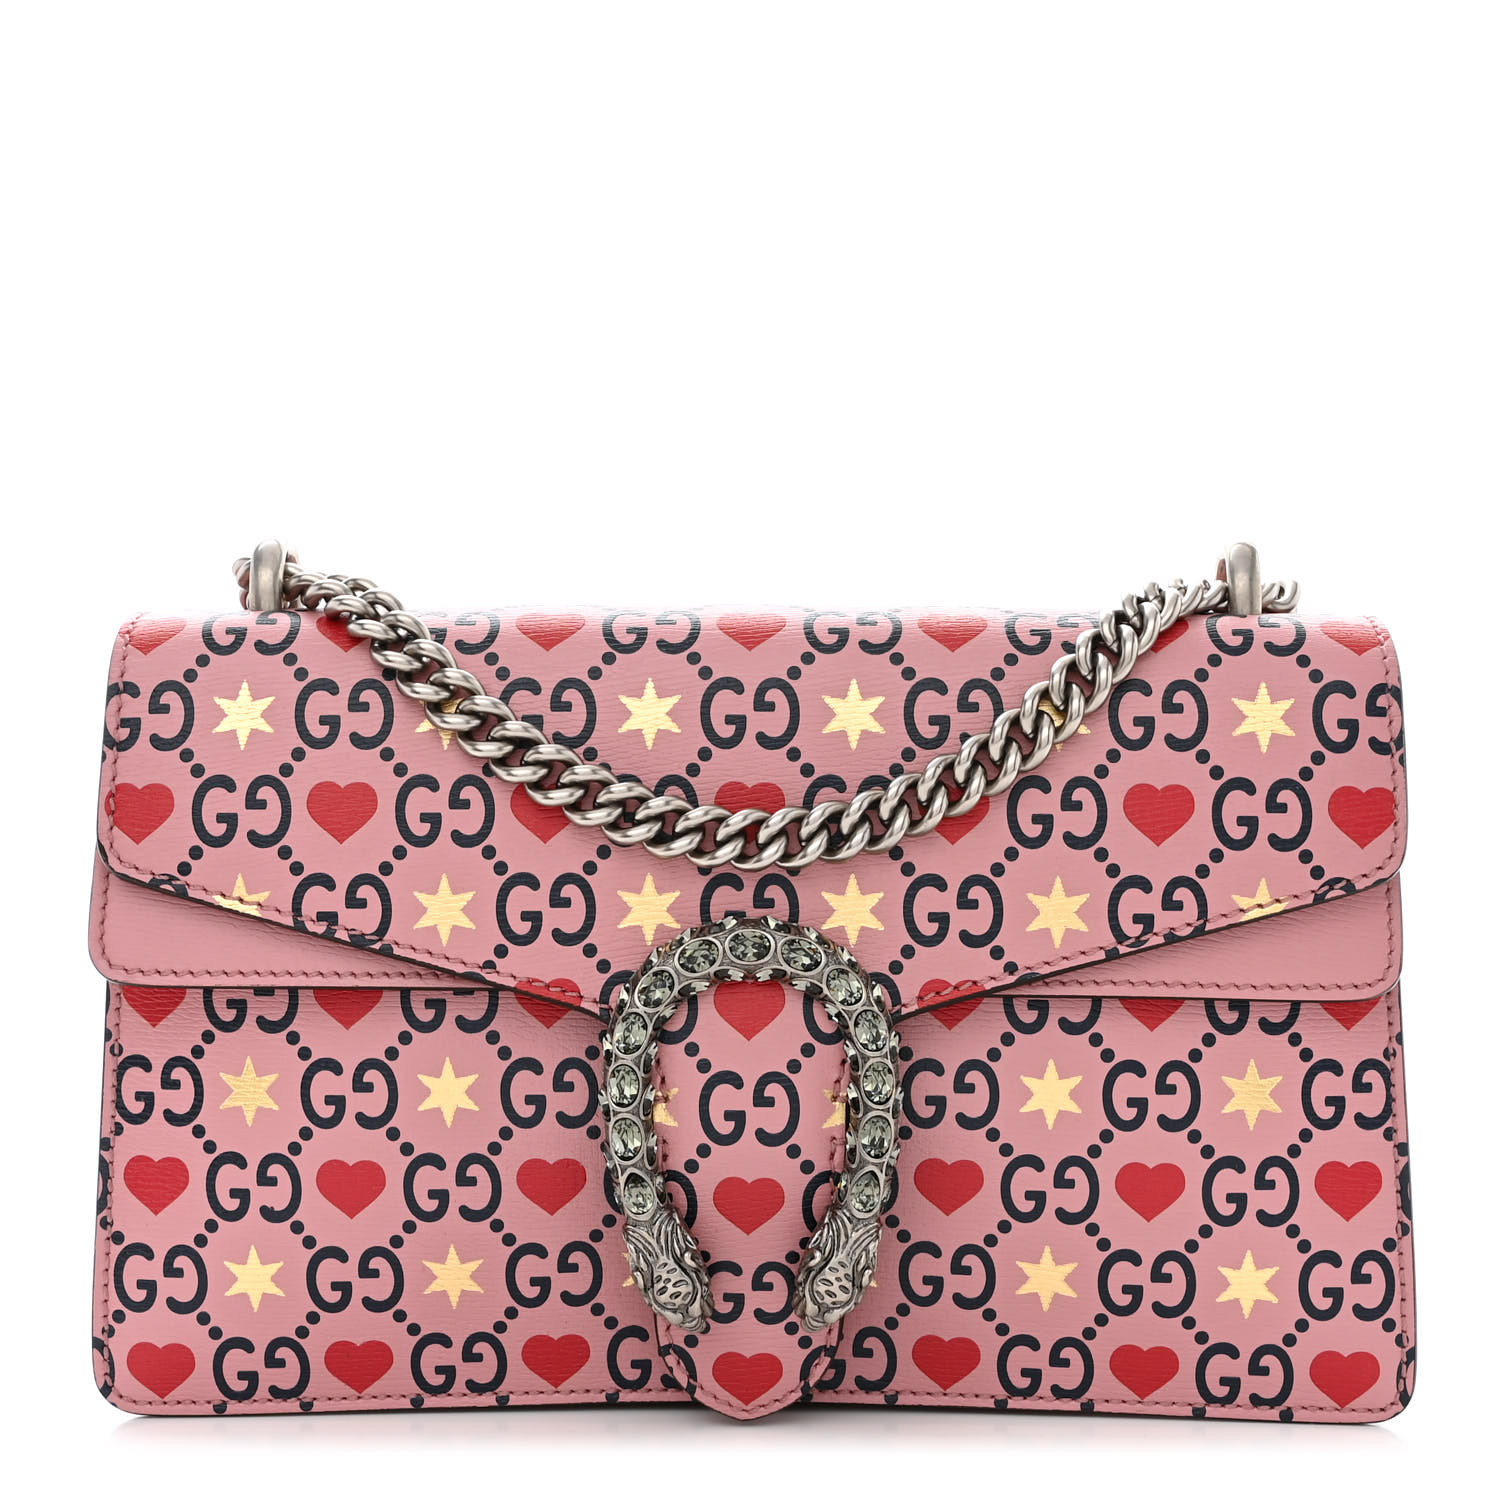 image of GUCCI Calfskin Valentine's Day Exclusive Small Dionysus Bag in the color Pink by FASHIONPHILE